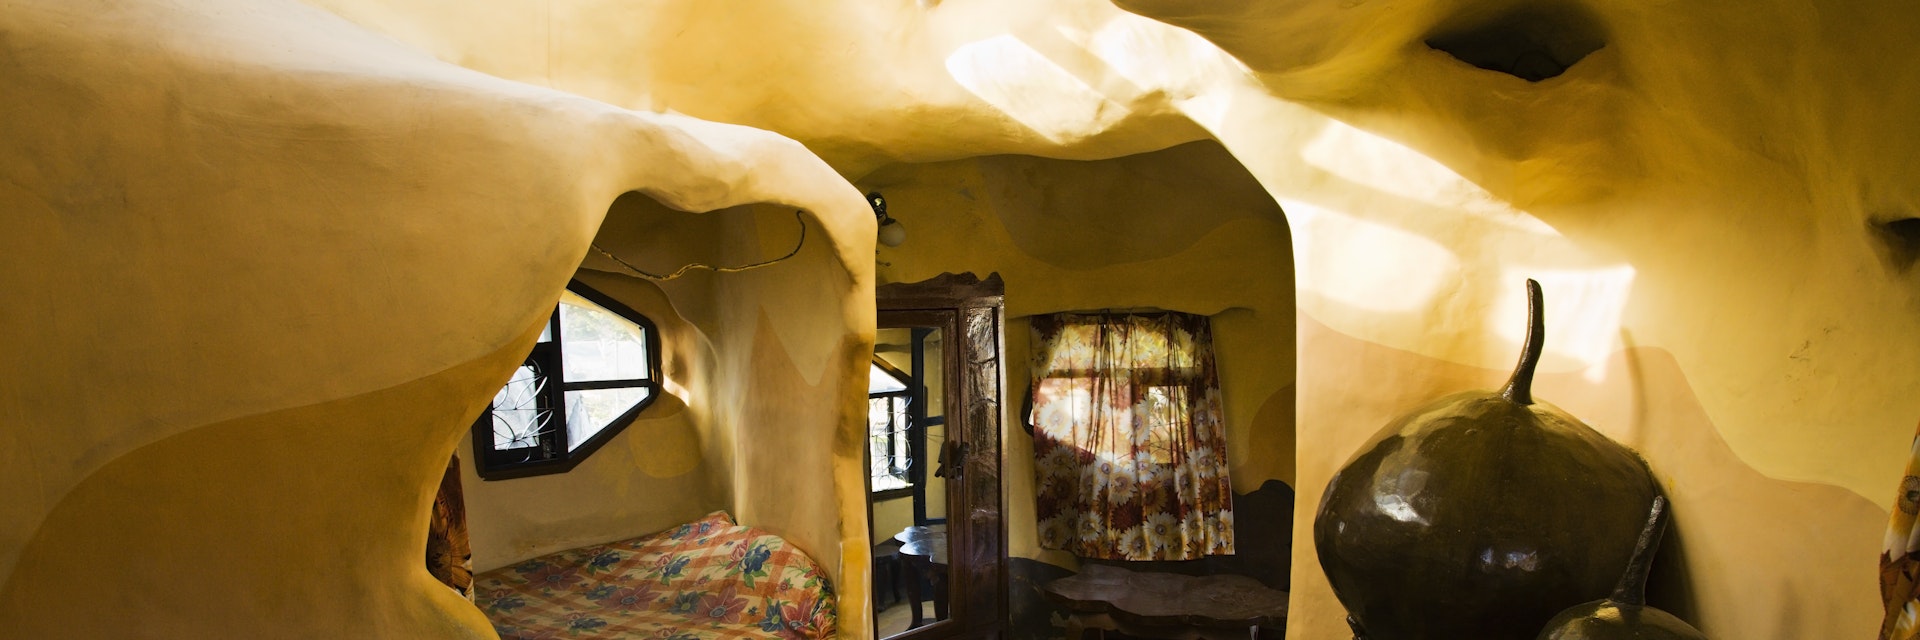 Room for guests in Hang Nga Crazy House on Huynh Thuc Khang Street.